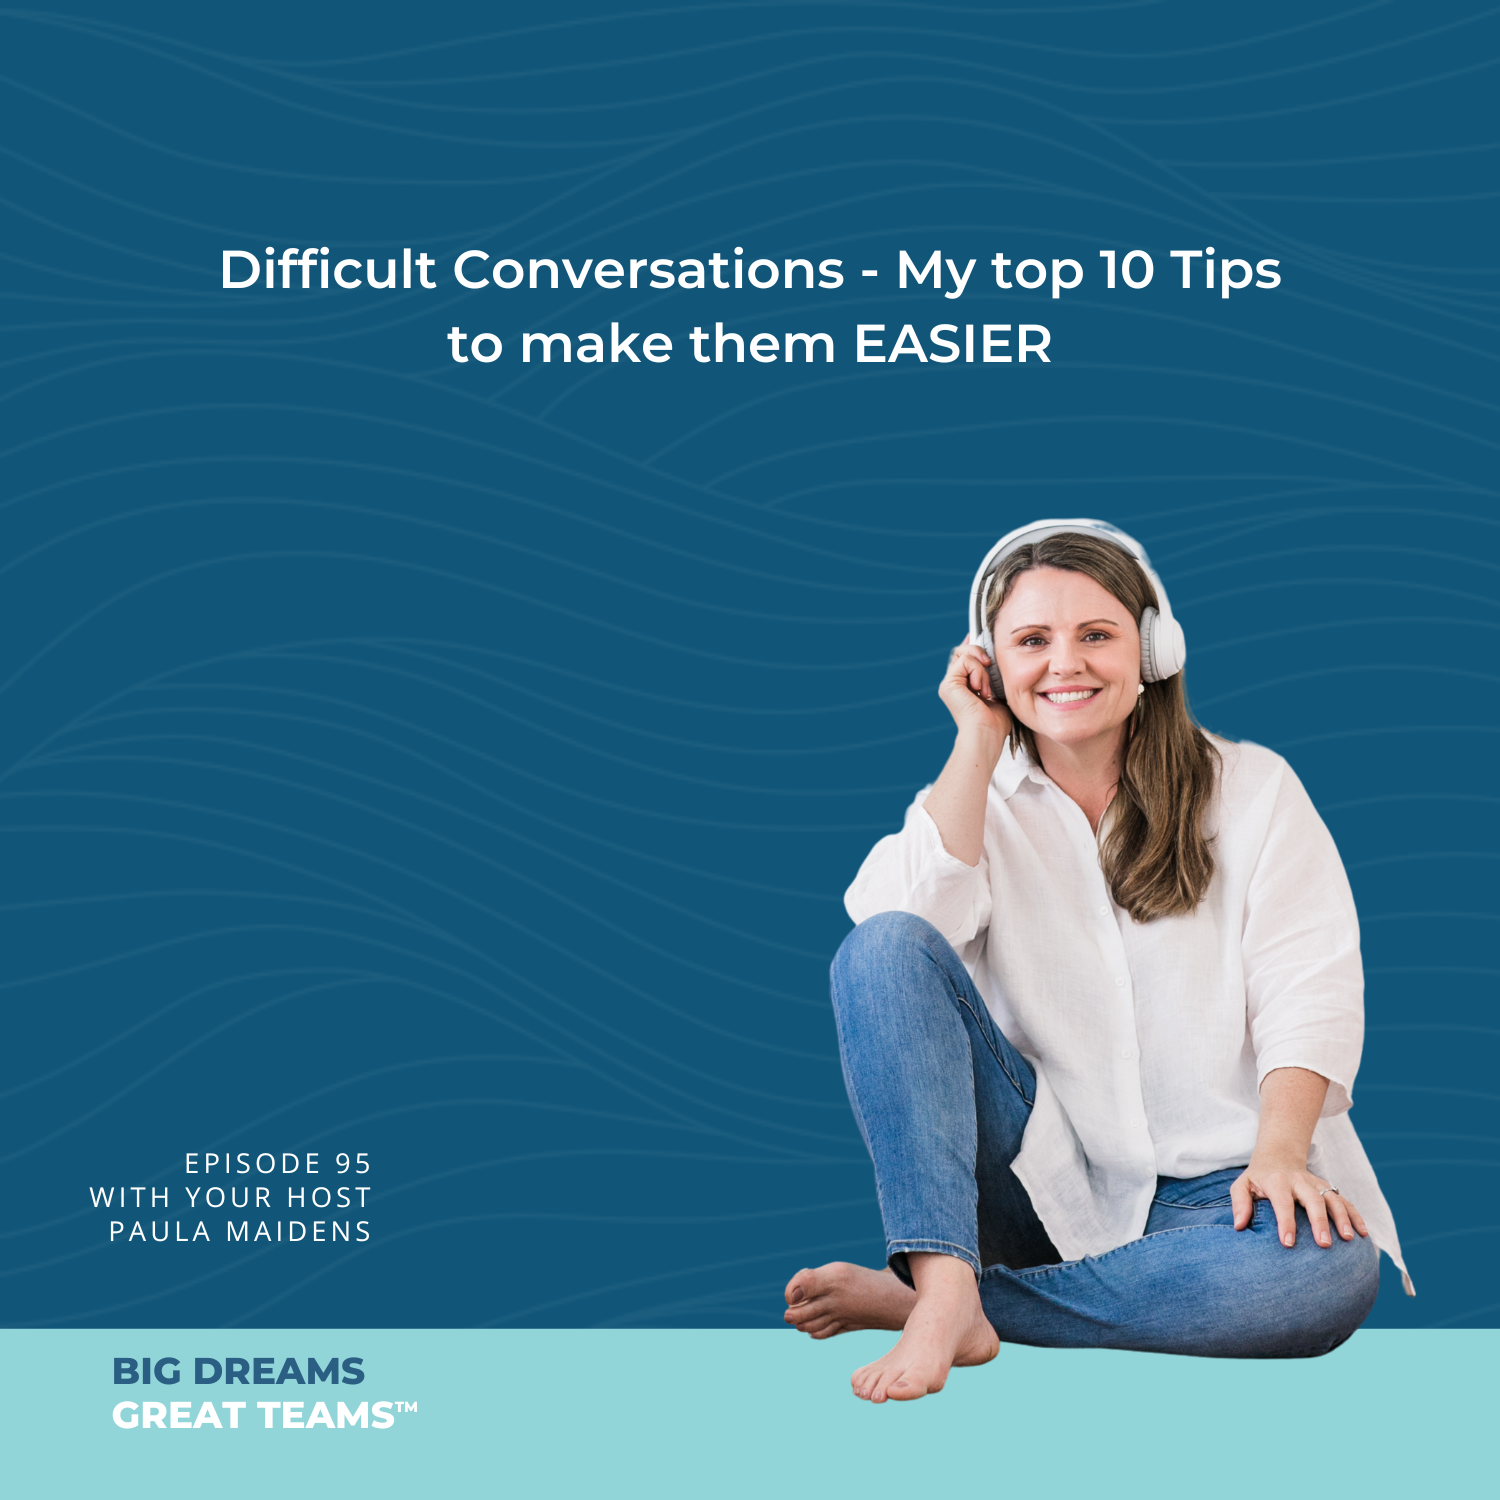 Episode #95 - Difficult Conversations - My top 10 Tips to make them EASIER